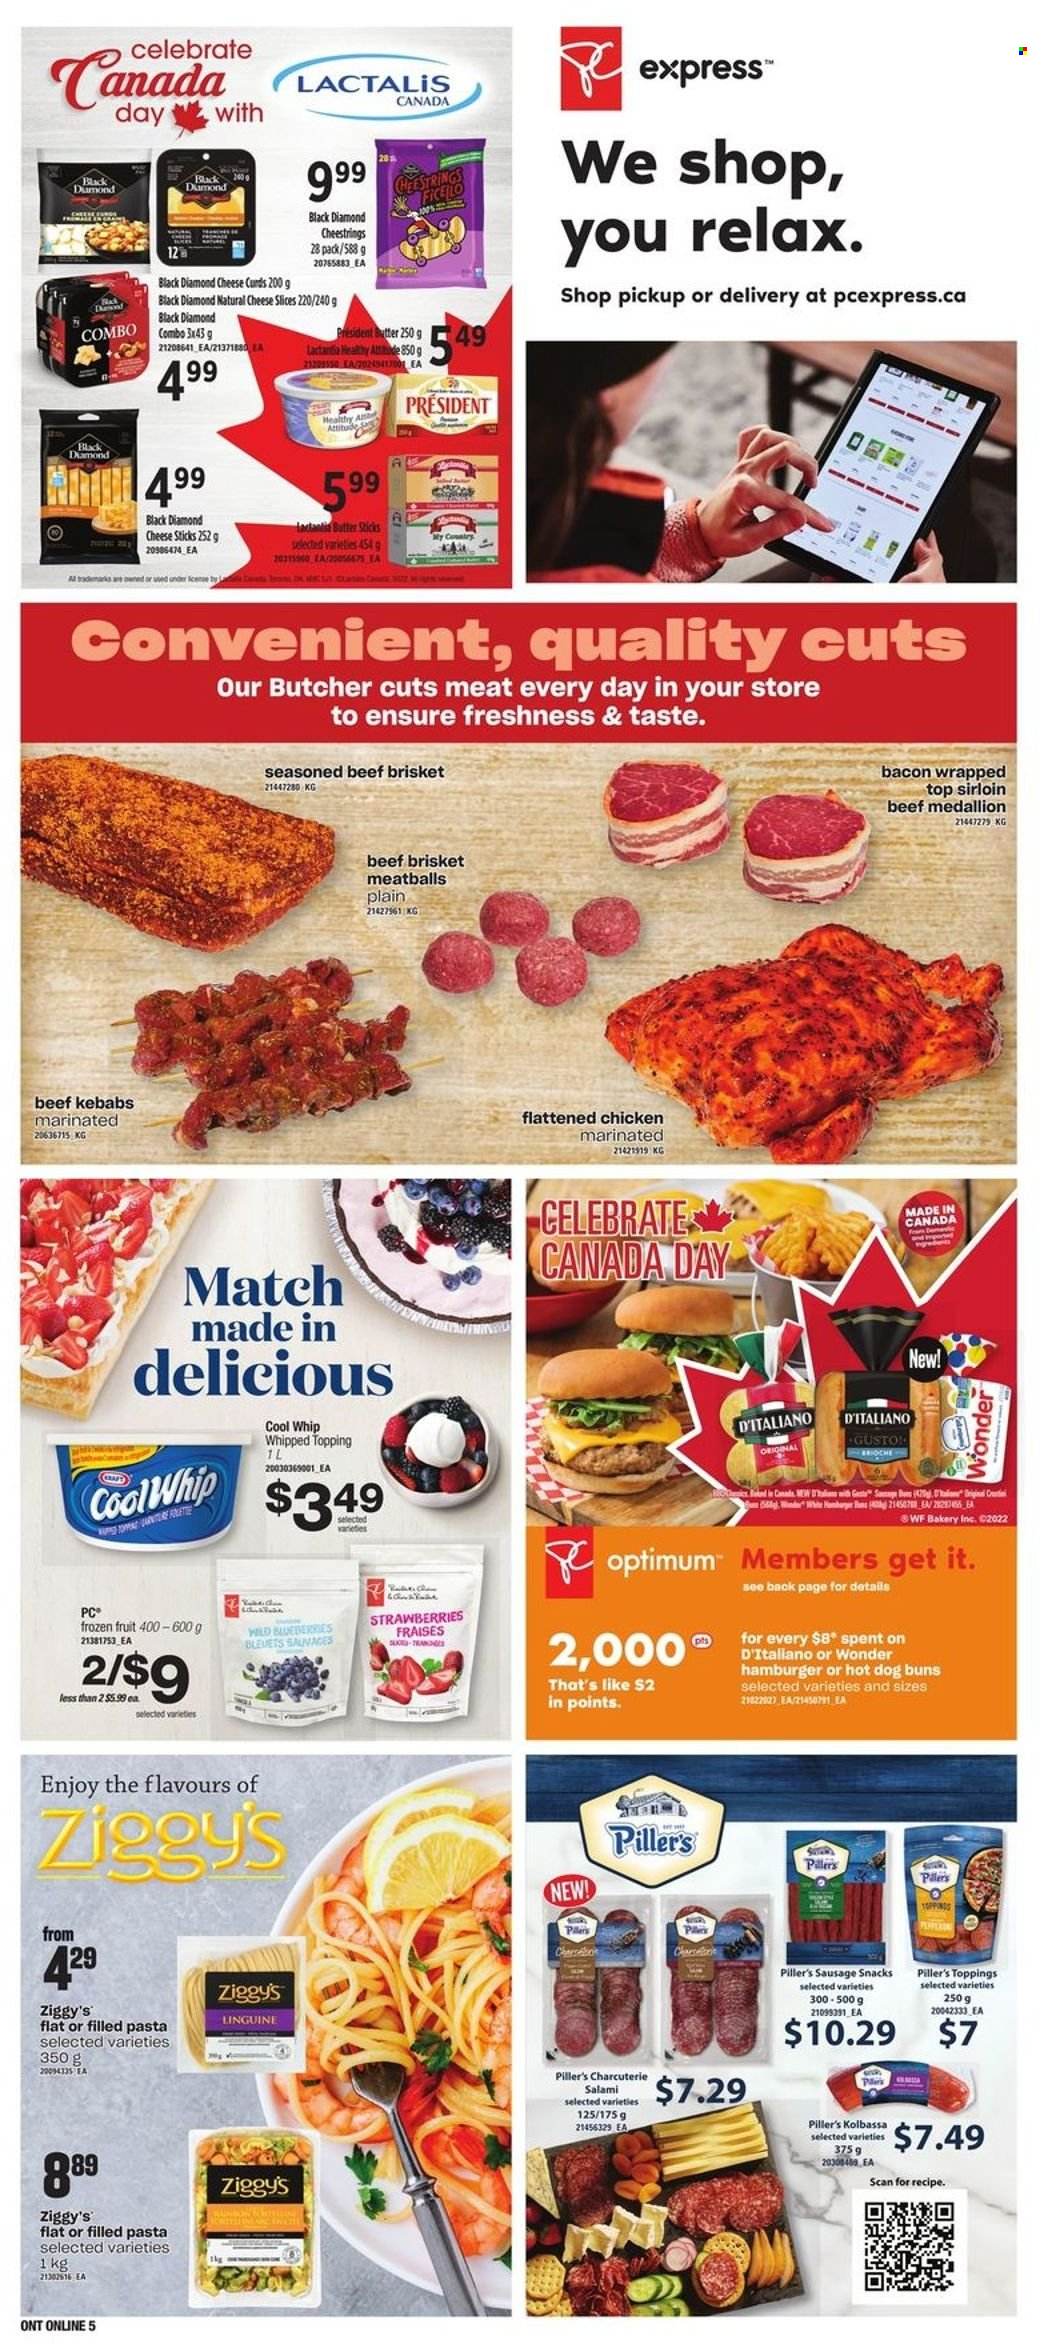 thumbnail - Loblaws Flyer - June 30, 2022 - July 06, 2022 - Sales products - buns, brioche, blueberries, strawberries, meatballs, pasta, filled pasta, bacon, salami, sausage, sliced cheese, string cheese, cheese, Président, butter, Cool Whip, cheese sticks, snack, topping, beef meat, beef brisket, Optimum. Page 10.